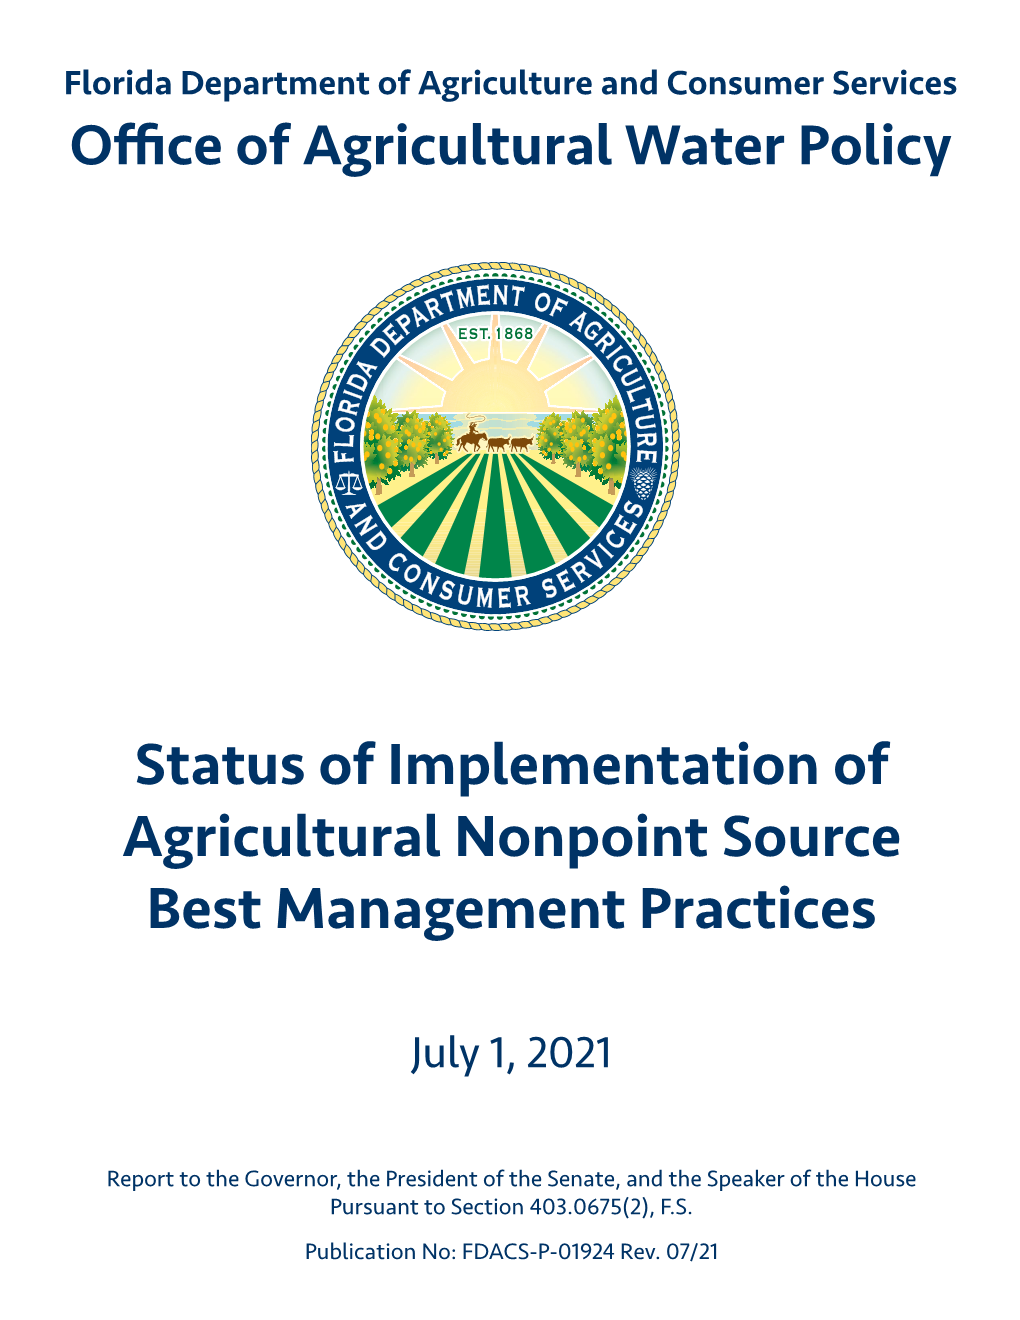 Status of Implementation of Agricultural Nonpoint Source Best Management Practices